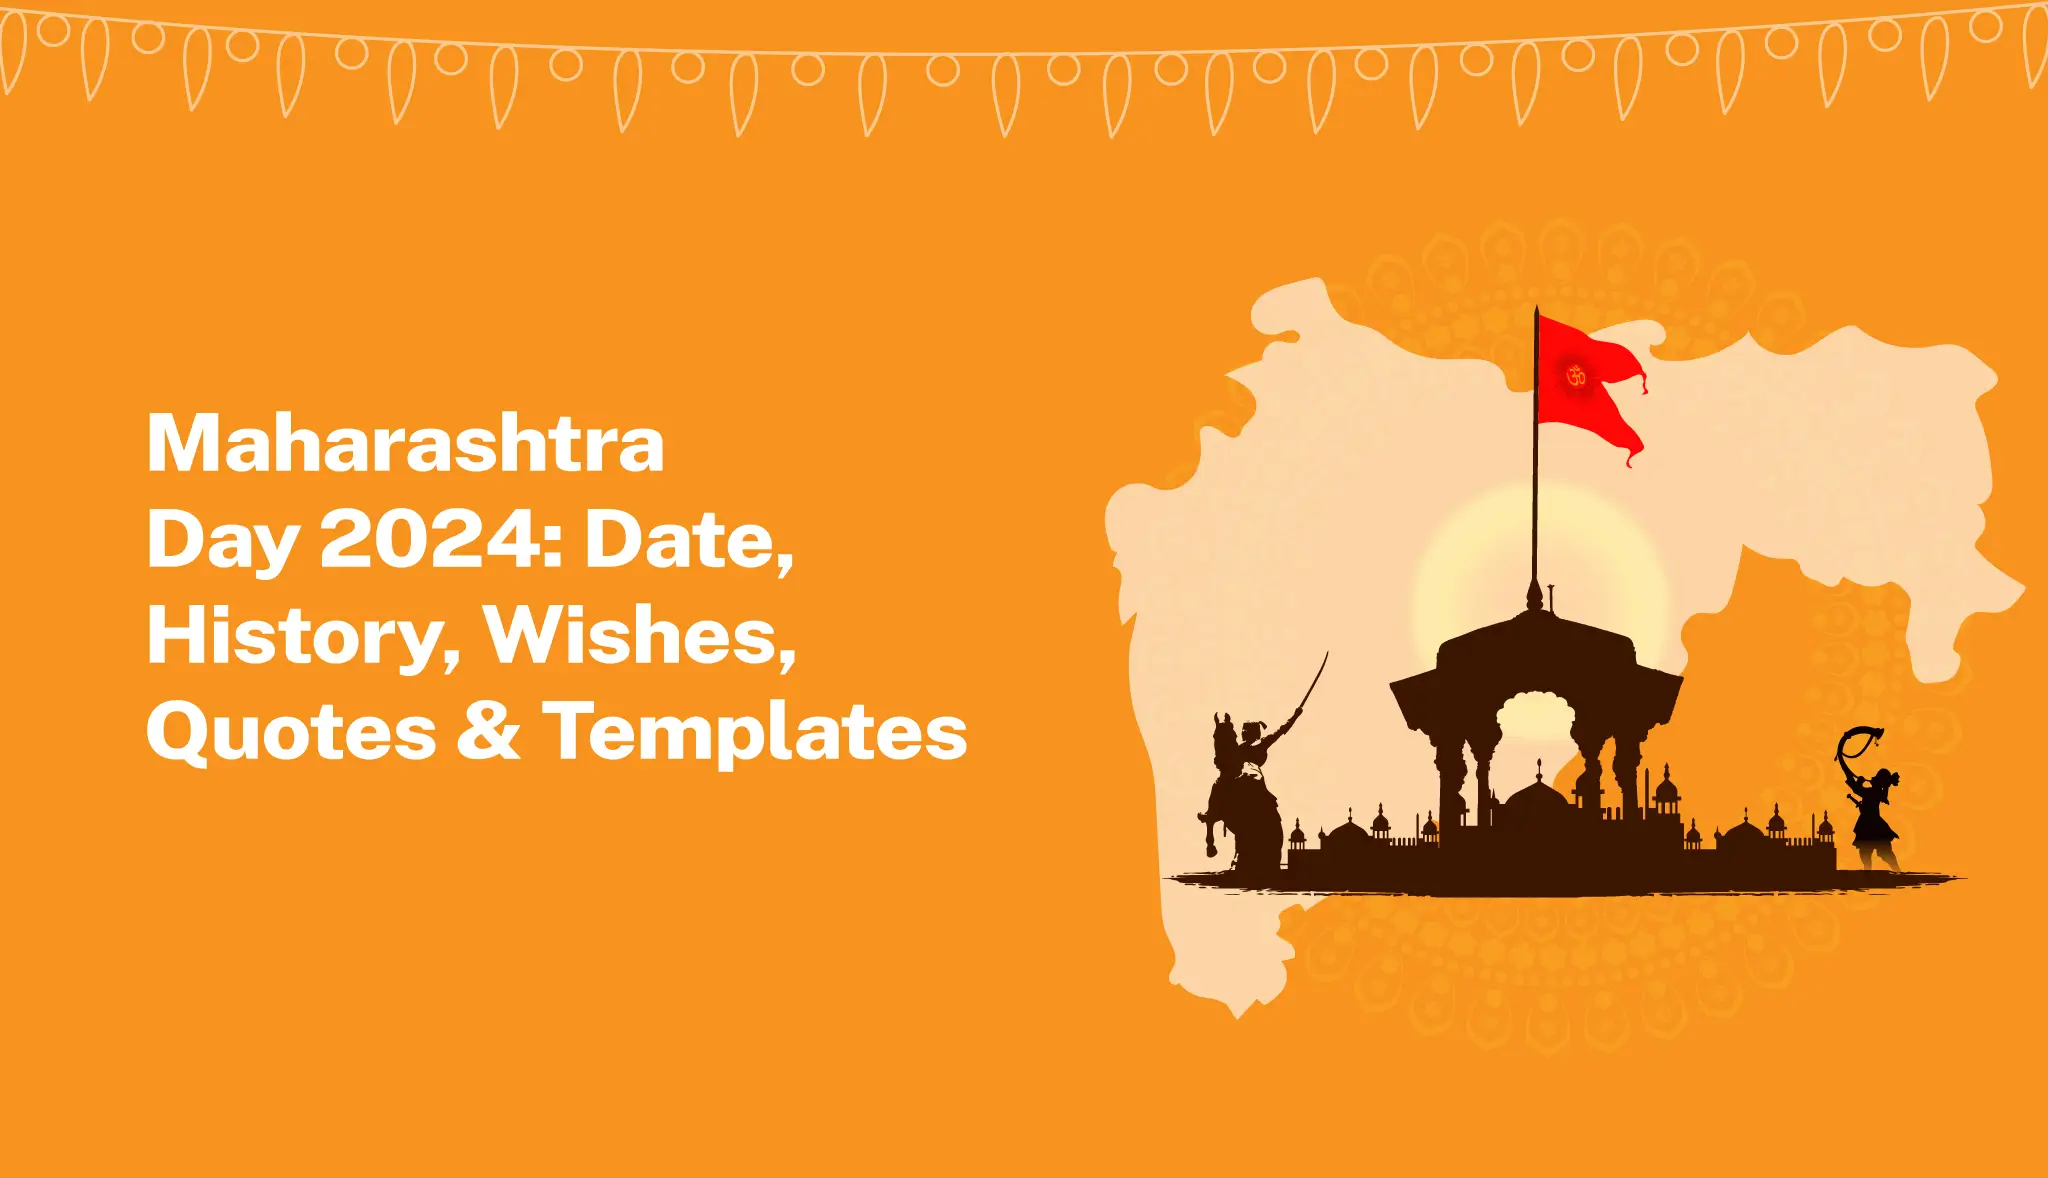 Maharashtra Day 2024: Date, History, Wishes, Quotes & Templates - Postive